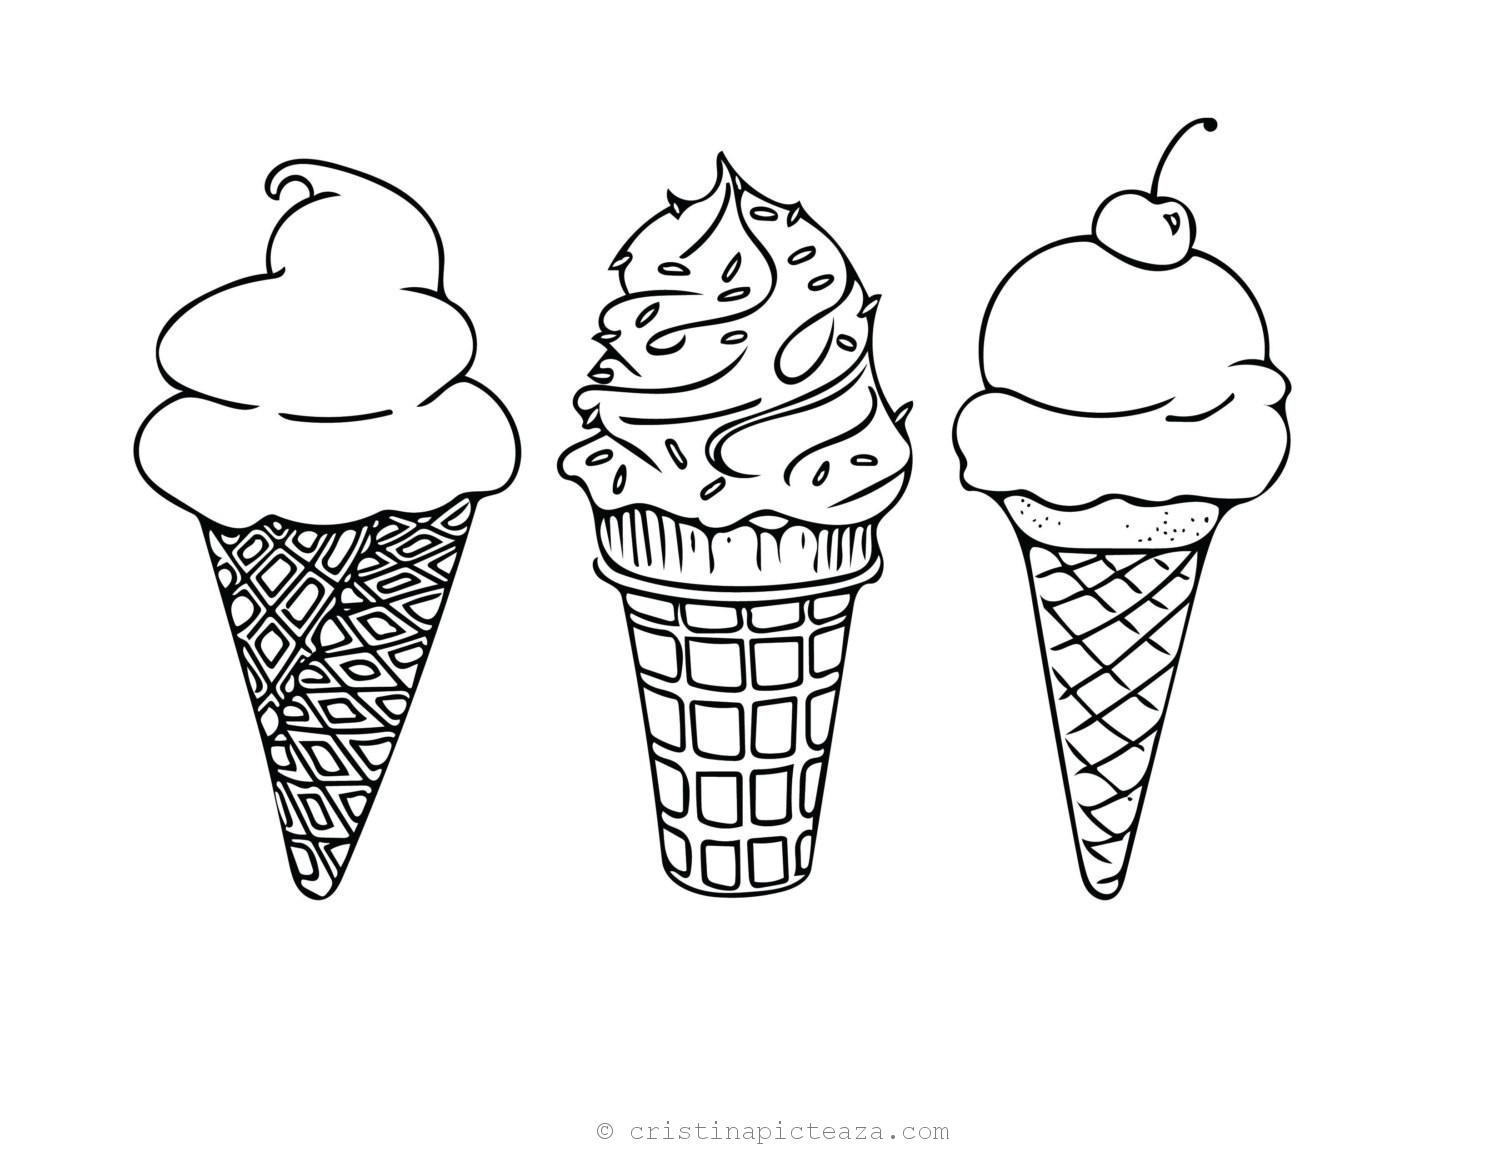 Coloring Page of Ice Cream – Pages for coloring with Popsicles